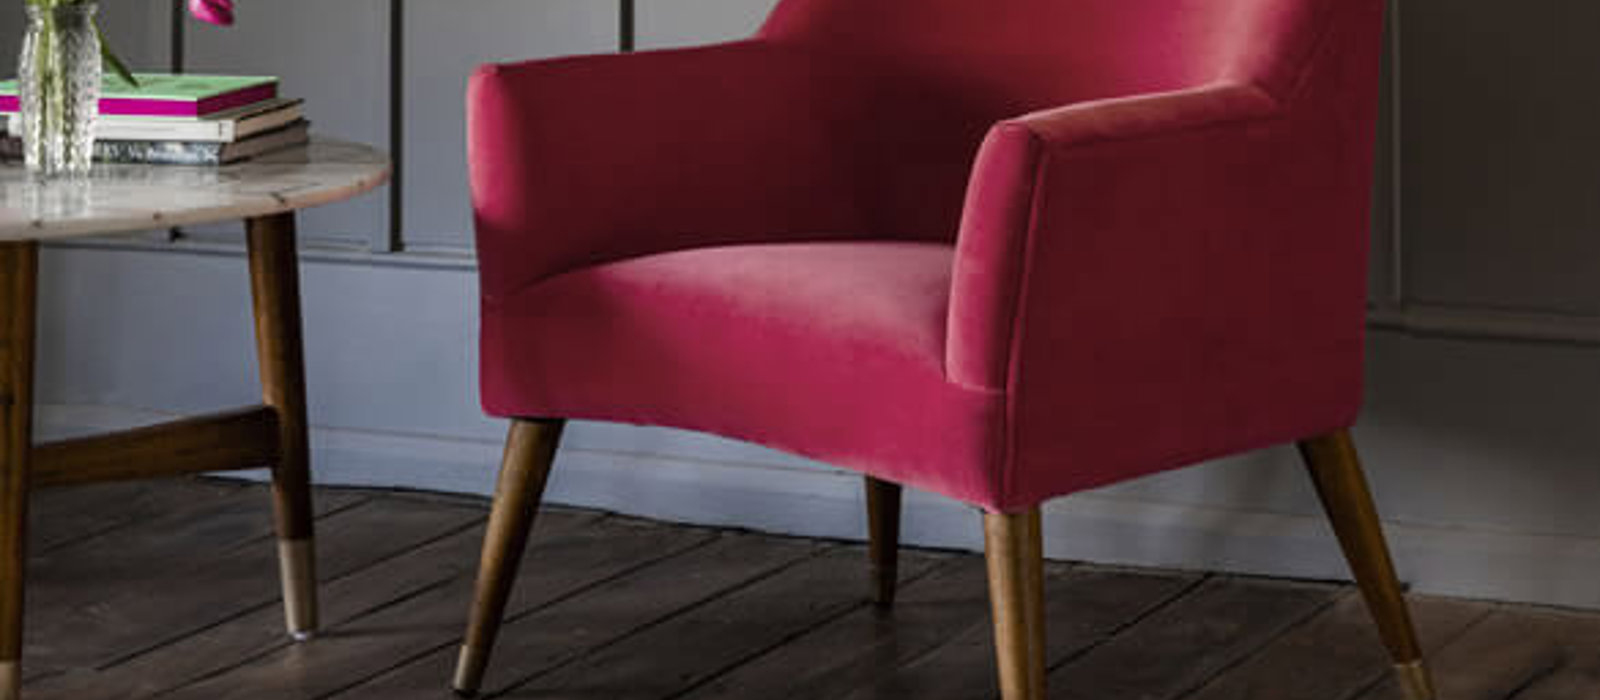 Hot pink armchair in a darkly decorated room